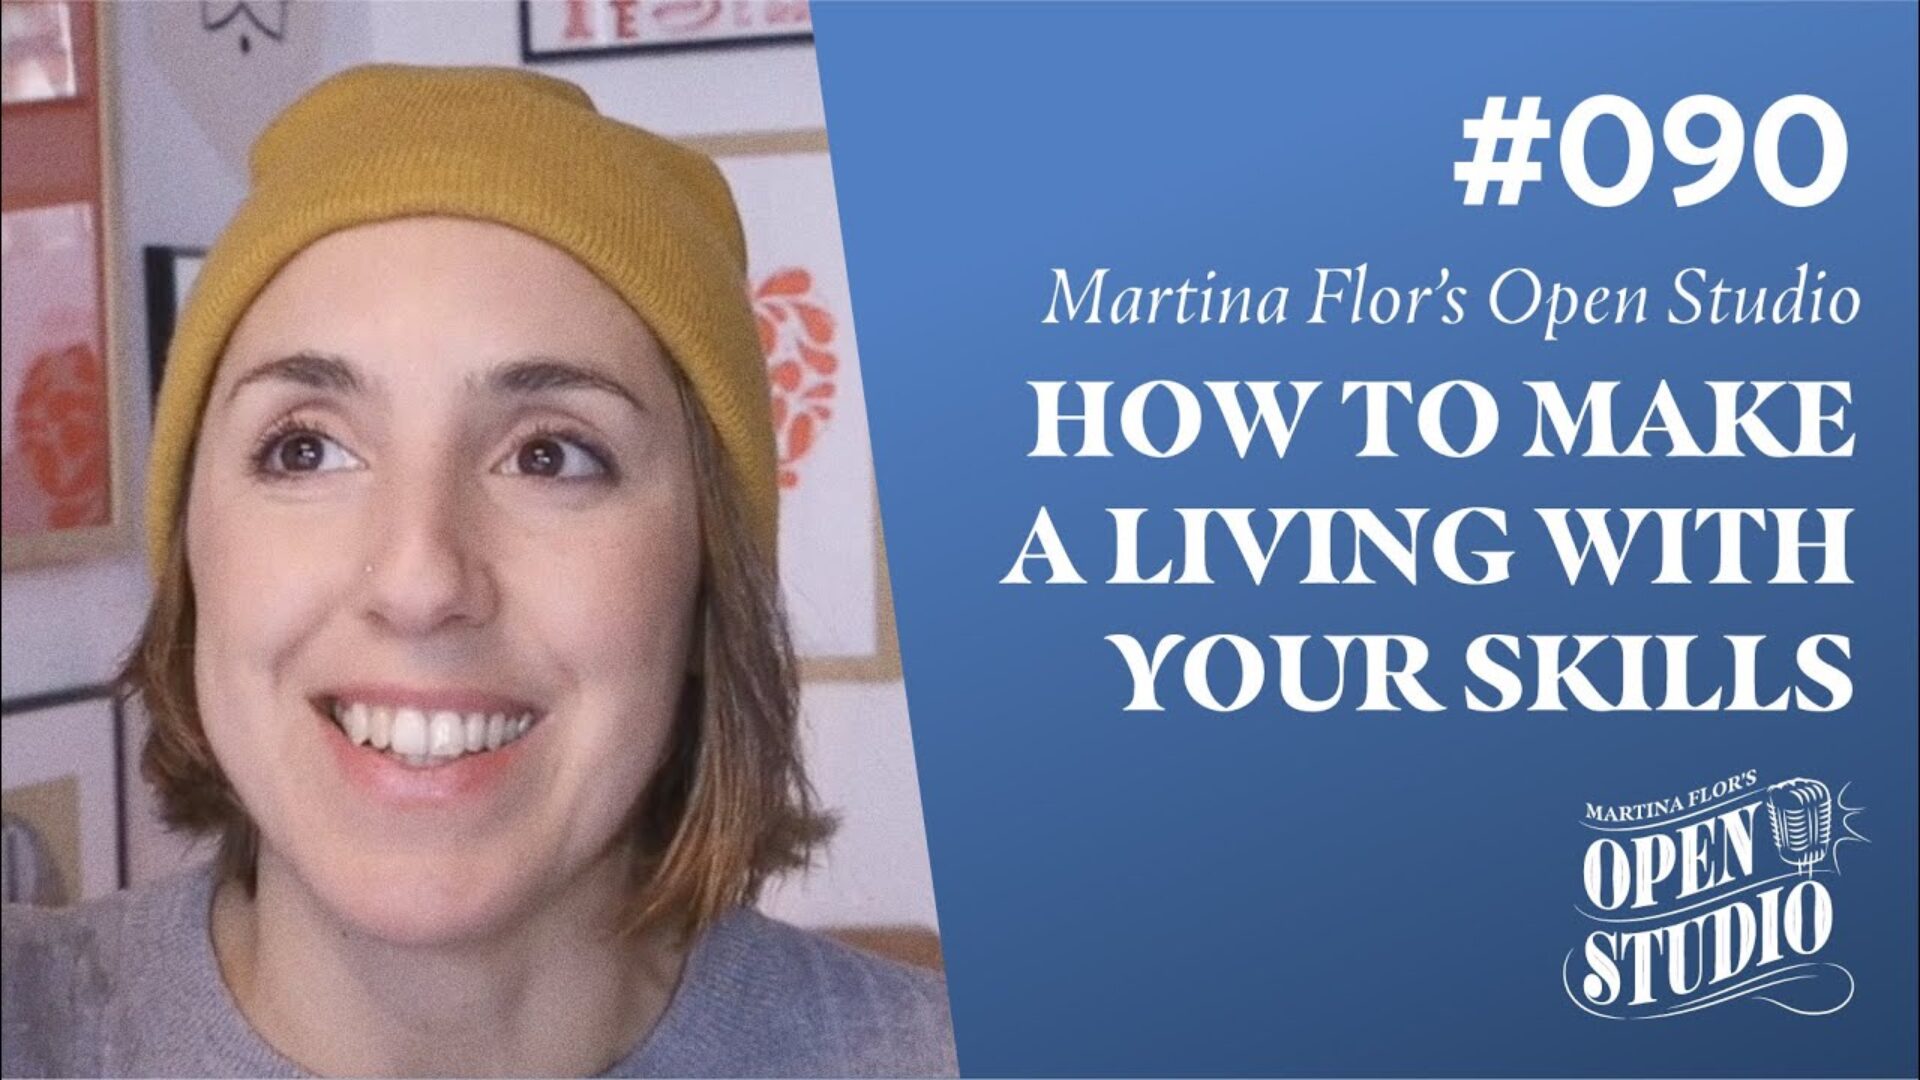 90. Martina Flor – From Amateur To Pro: When Are You Ready to Make A Living With Your Skills?